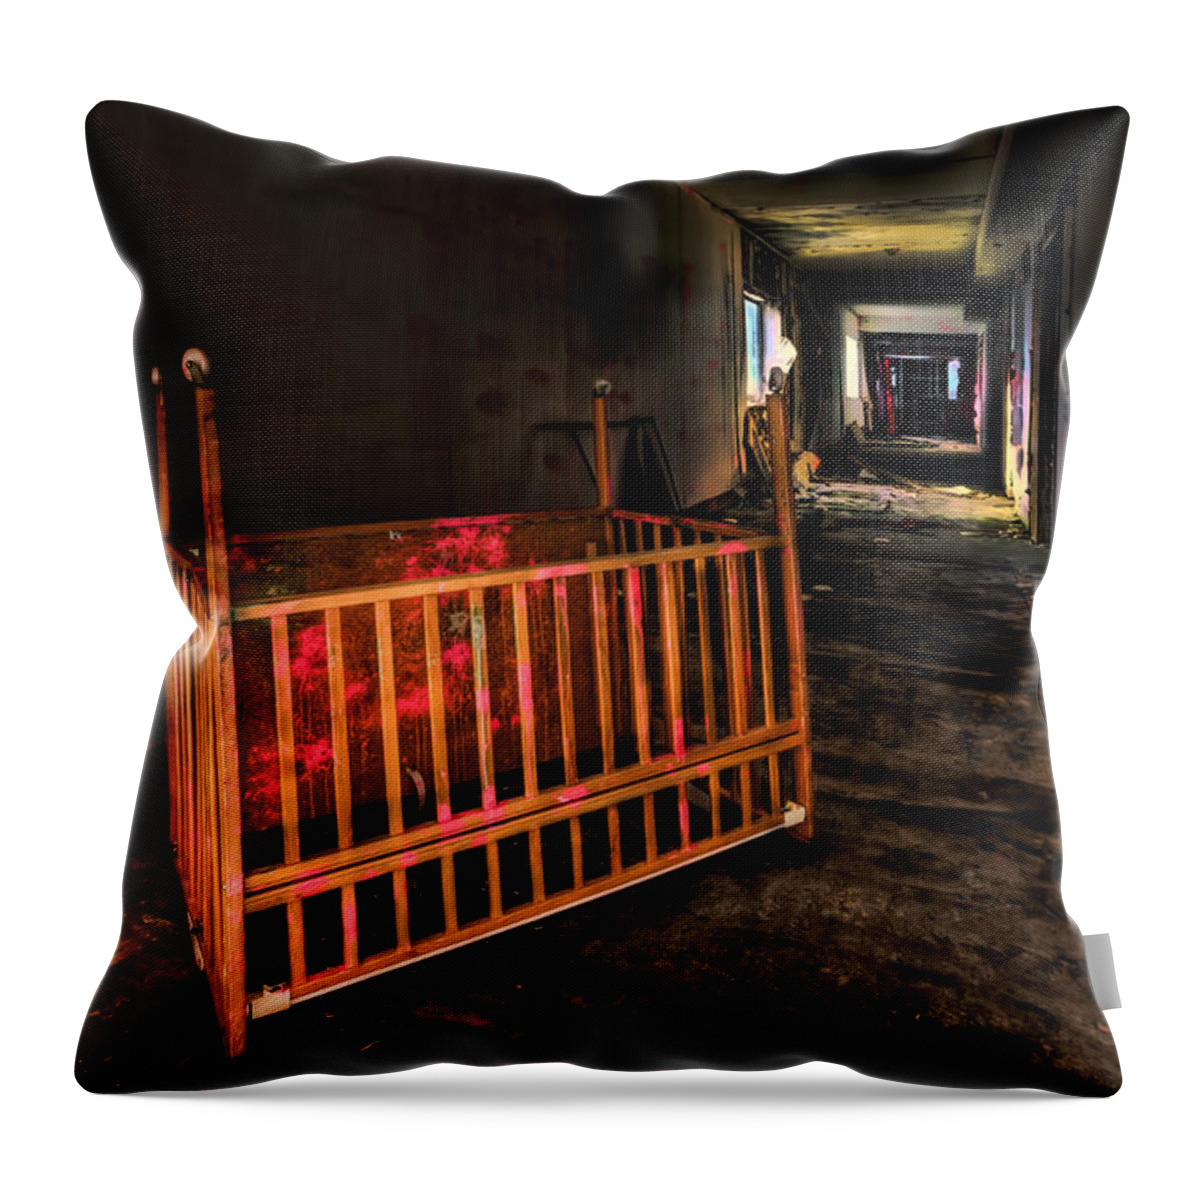 Lullaby Throw Pillow featuring the photograph Forgotten Lullaby by Evelina Kremsdorf